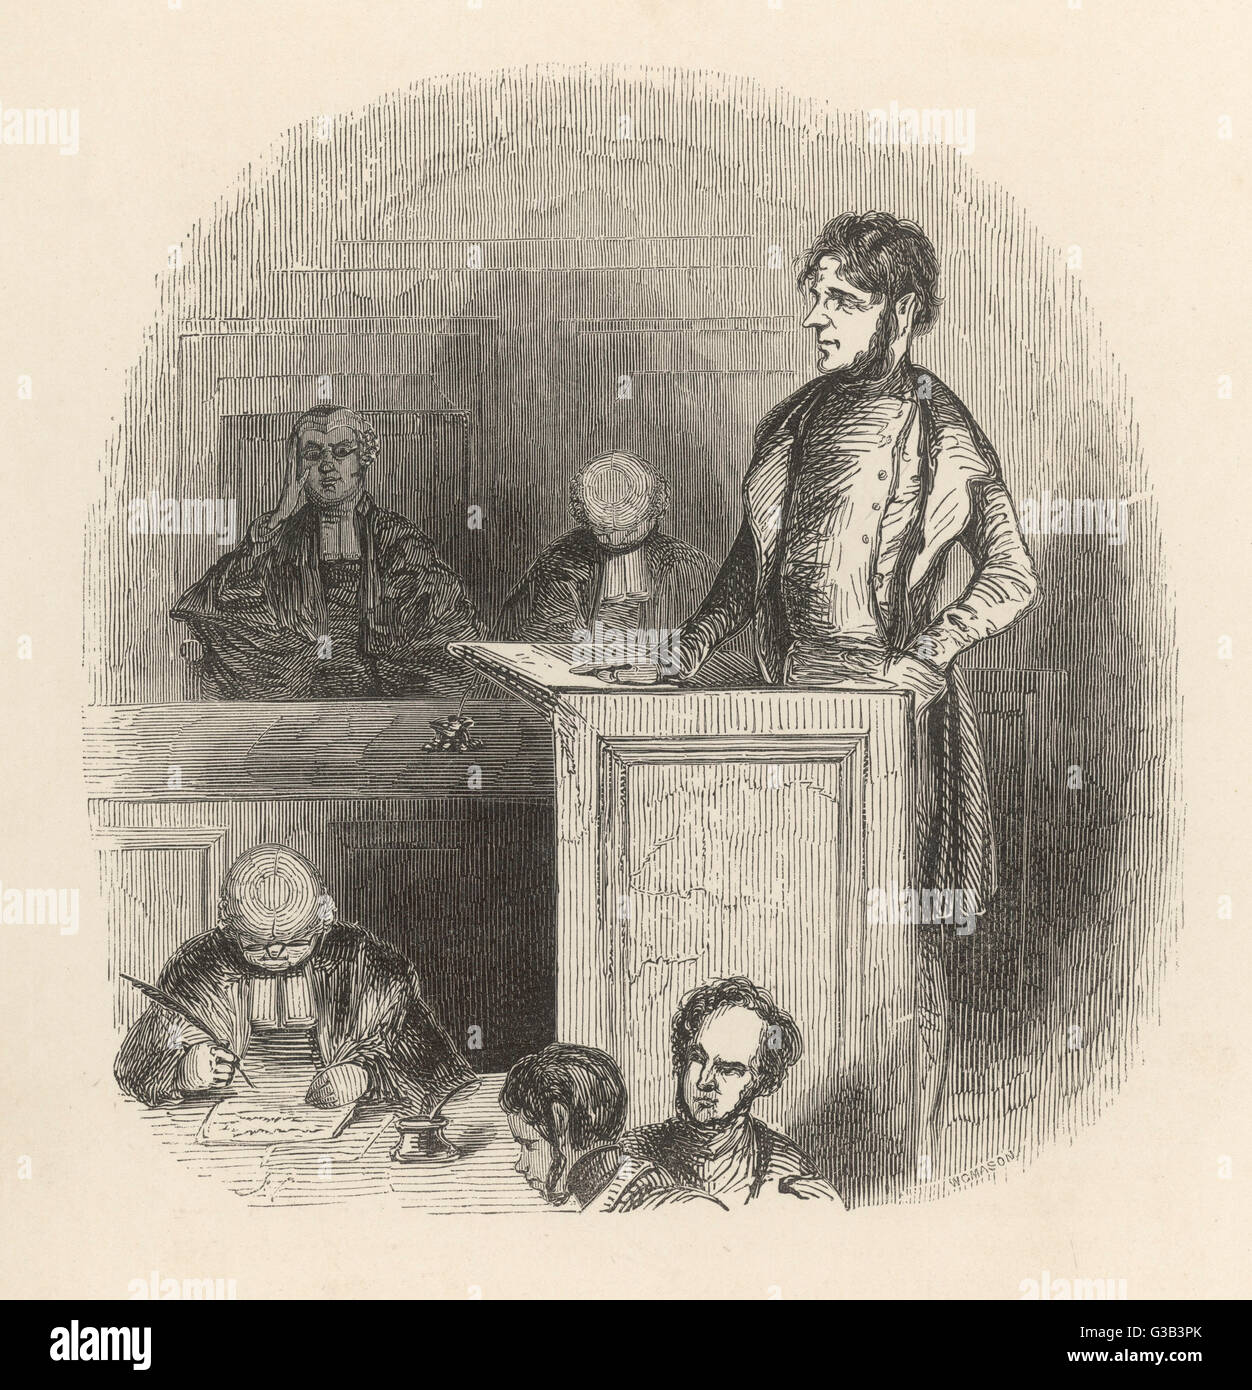 An insolvent debtor makes a  court appearance : soon, no  doubt, he will find himself  in a debtors' prison       Date: 1842 Stock Photo